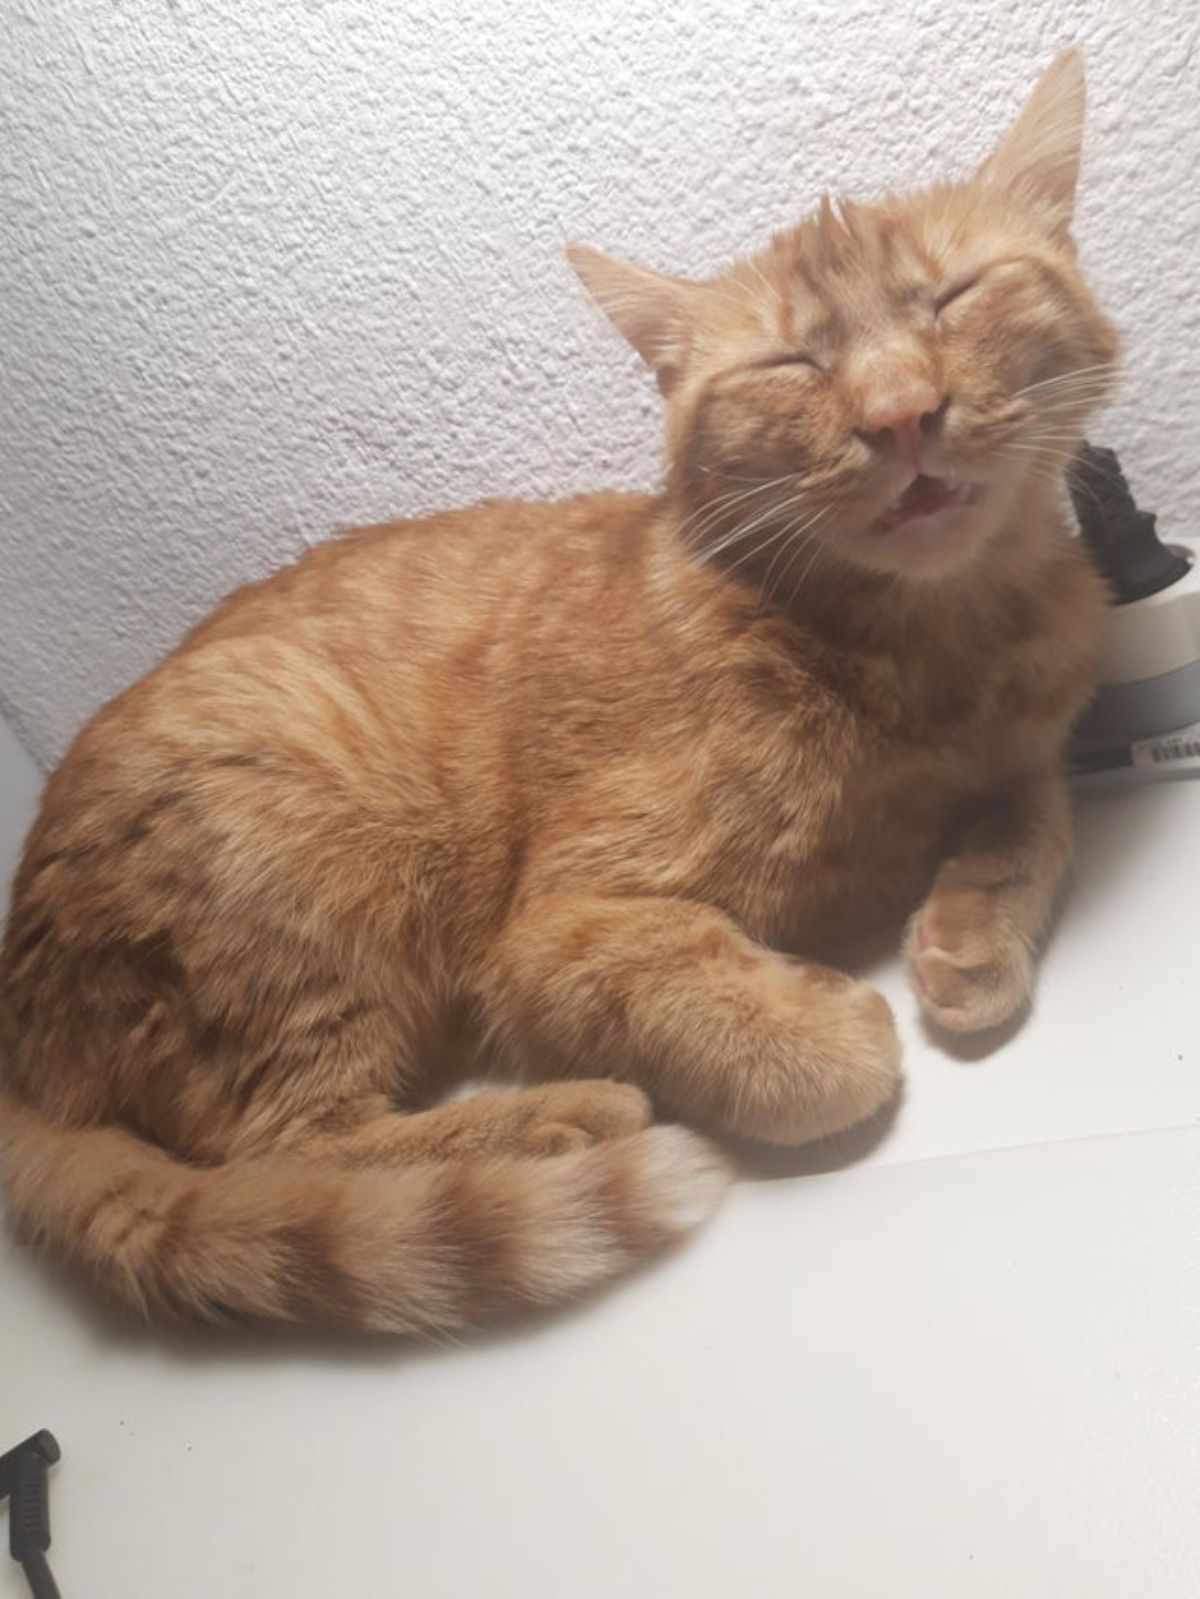 orange cat sleeping with the mouth open